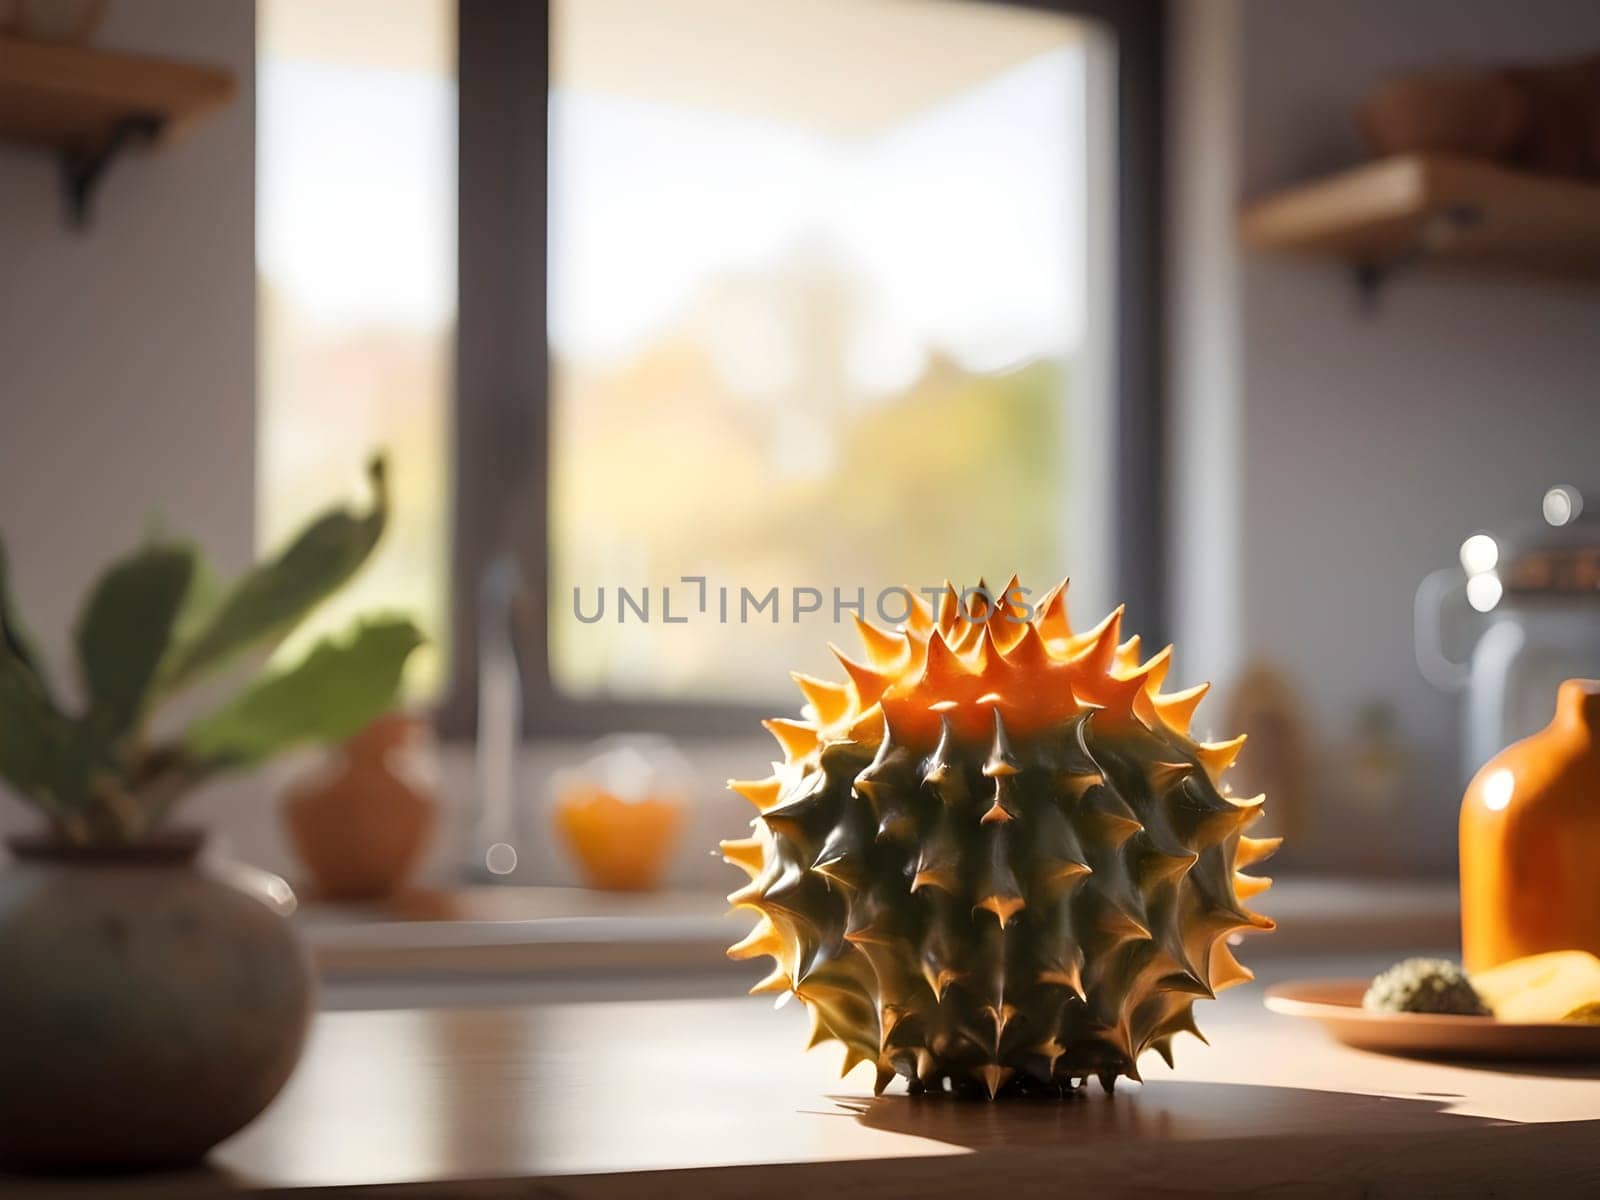 Capturing Kiwano Bliss: Illuminated Kitchen Ambiance in Soft Afternoon Light by mailos